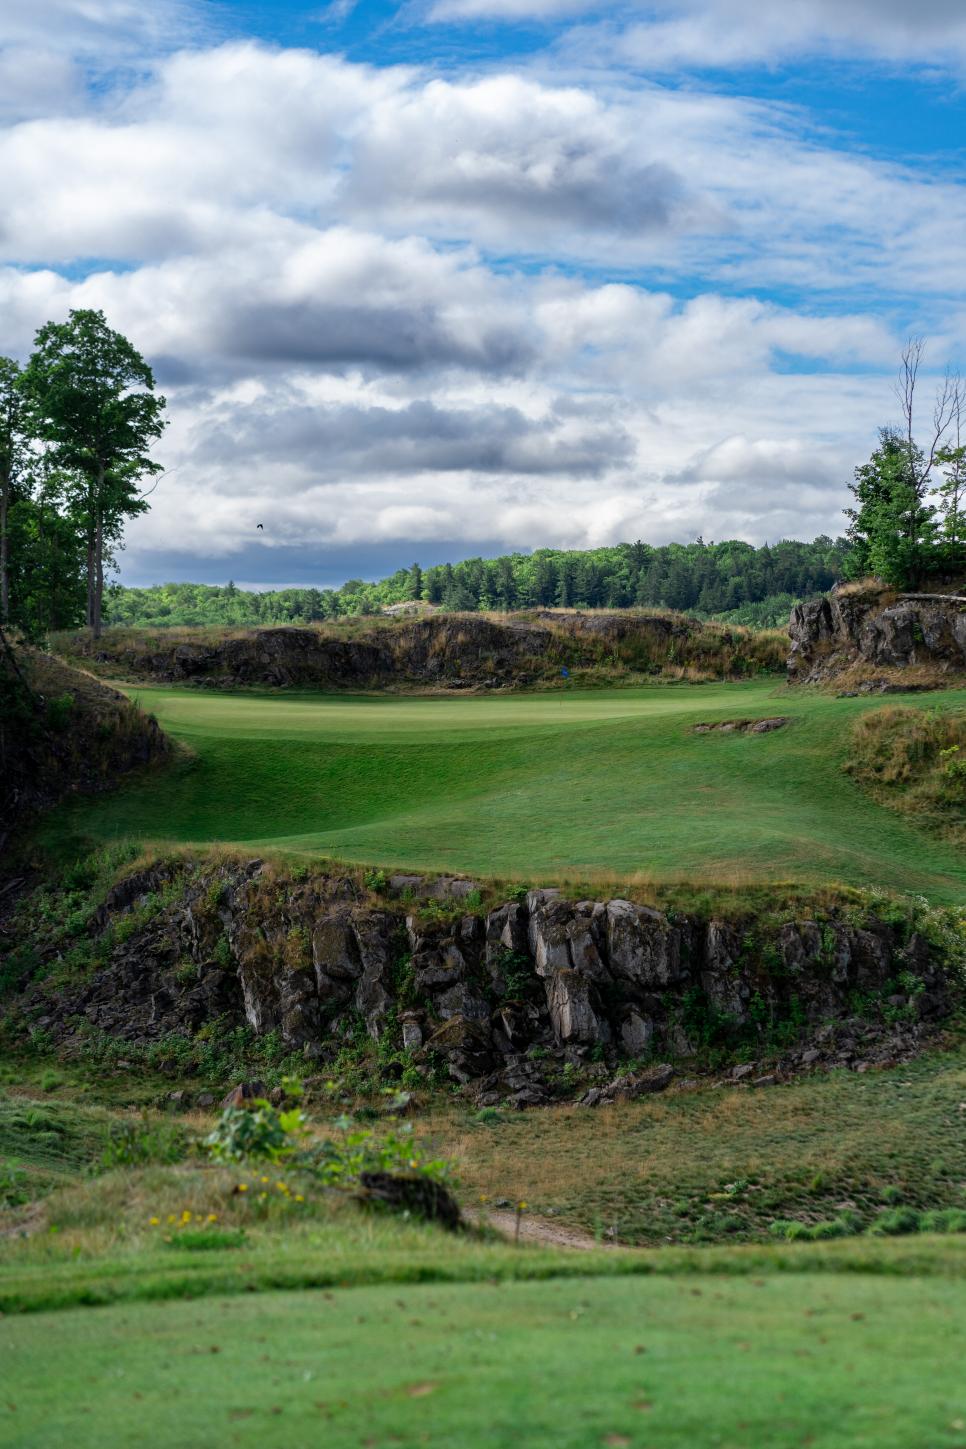 /content/dam/images/golfdigest/fullset/course-photos-for-places-to-play/Marquette-Golf-Club-Greywalls-hole6-22806.jpg